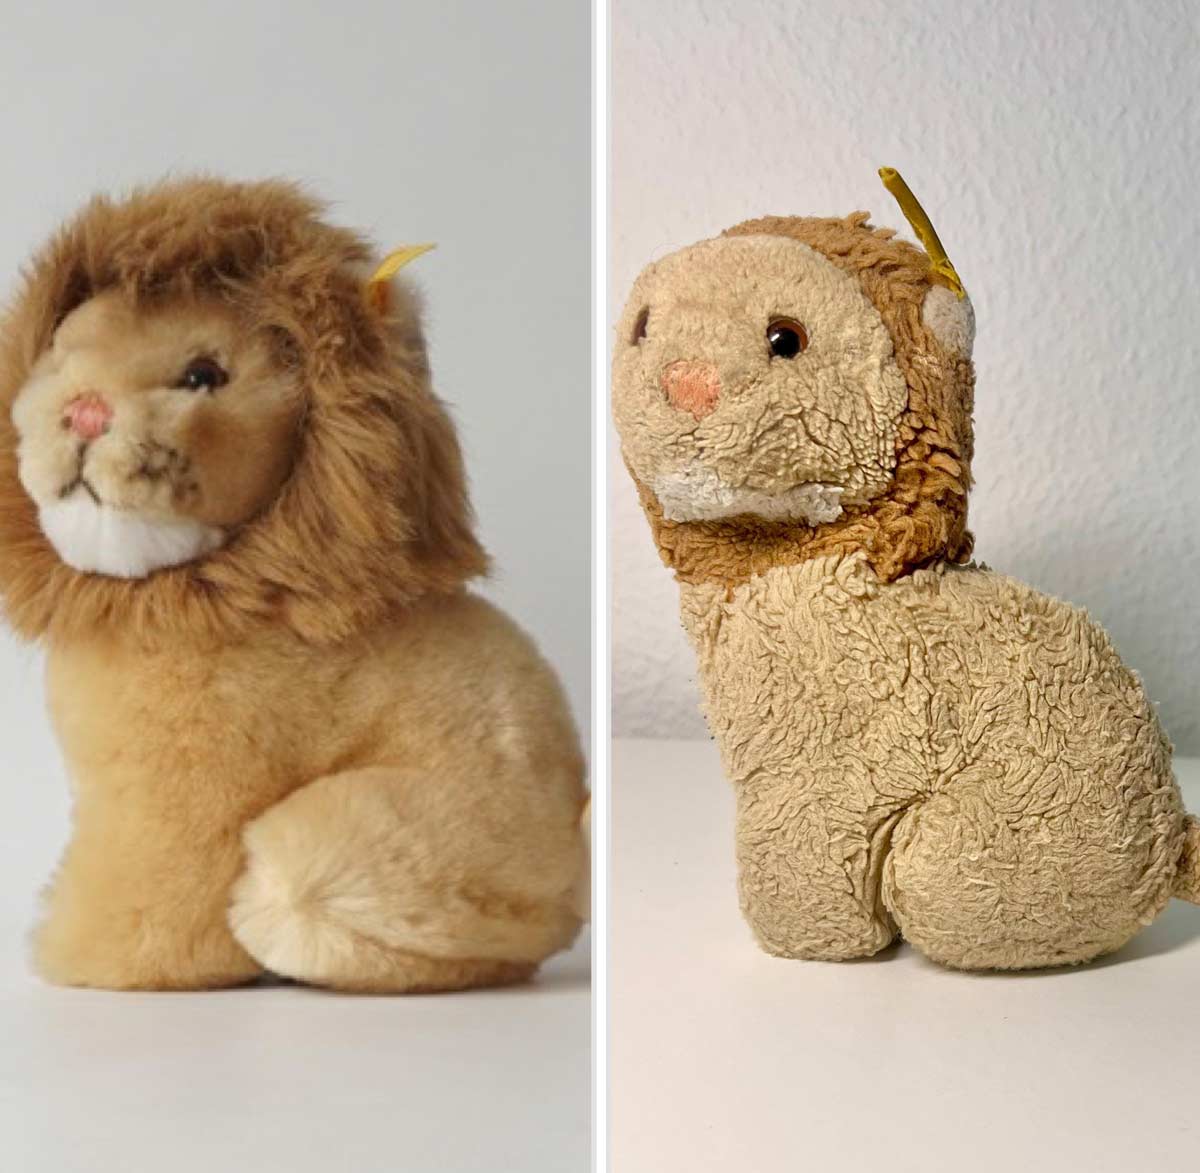 Aging of a Stuffed Animal Lion after 30 years. I cut its fur when I was 4 thinking it would grow back